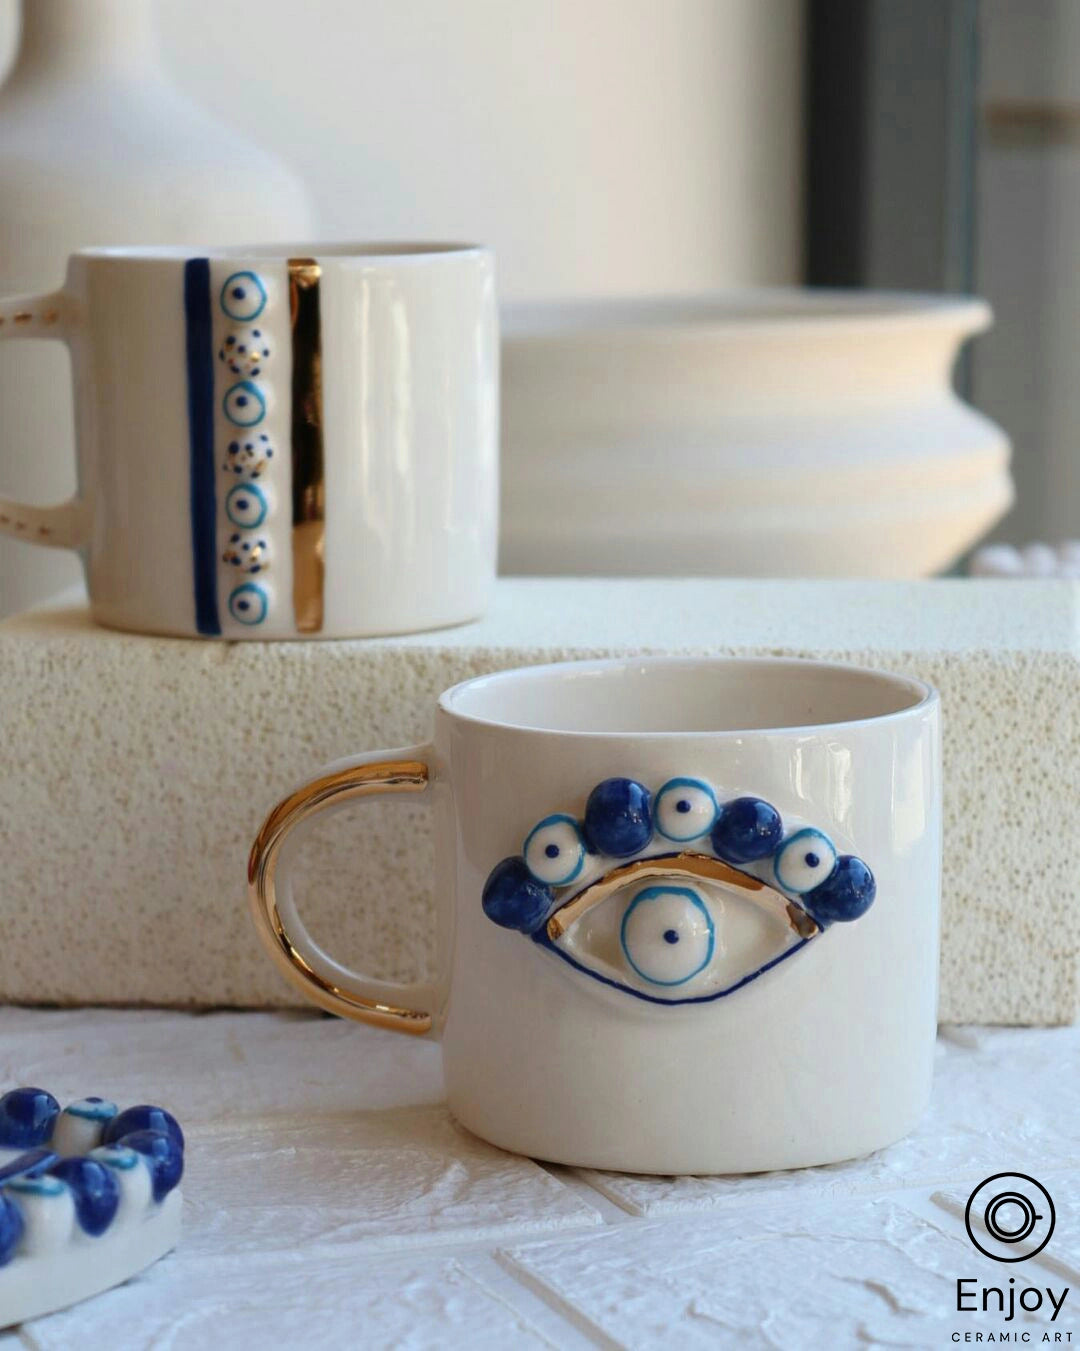 A prominent white ceramic mug with a glossy golden handle, featuring a large blue evil eye design on the side, situated on a marbled countertop with another similarly patterned item in the blurred background.